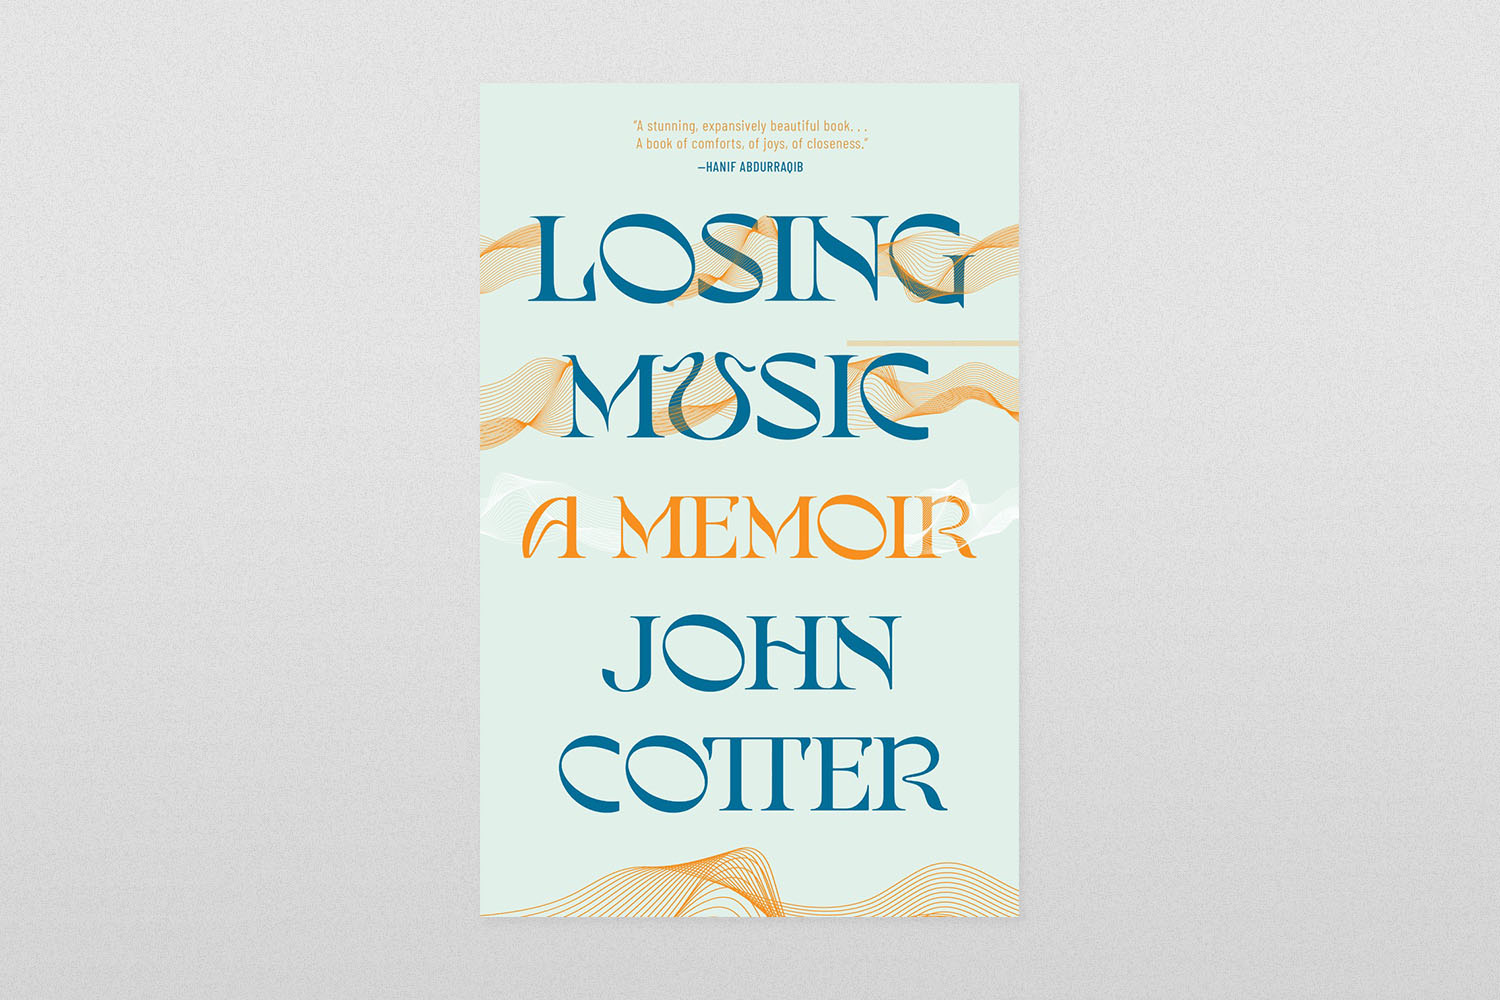 Losing Music by John Cotter